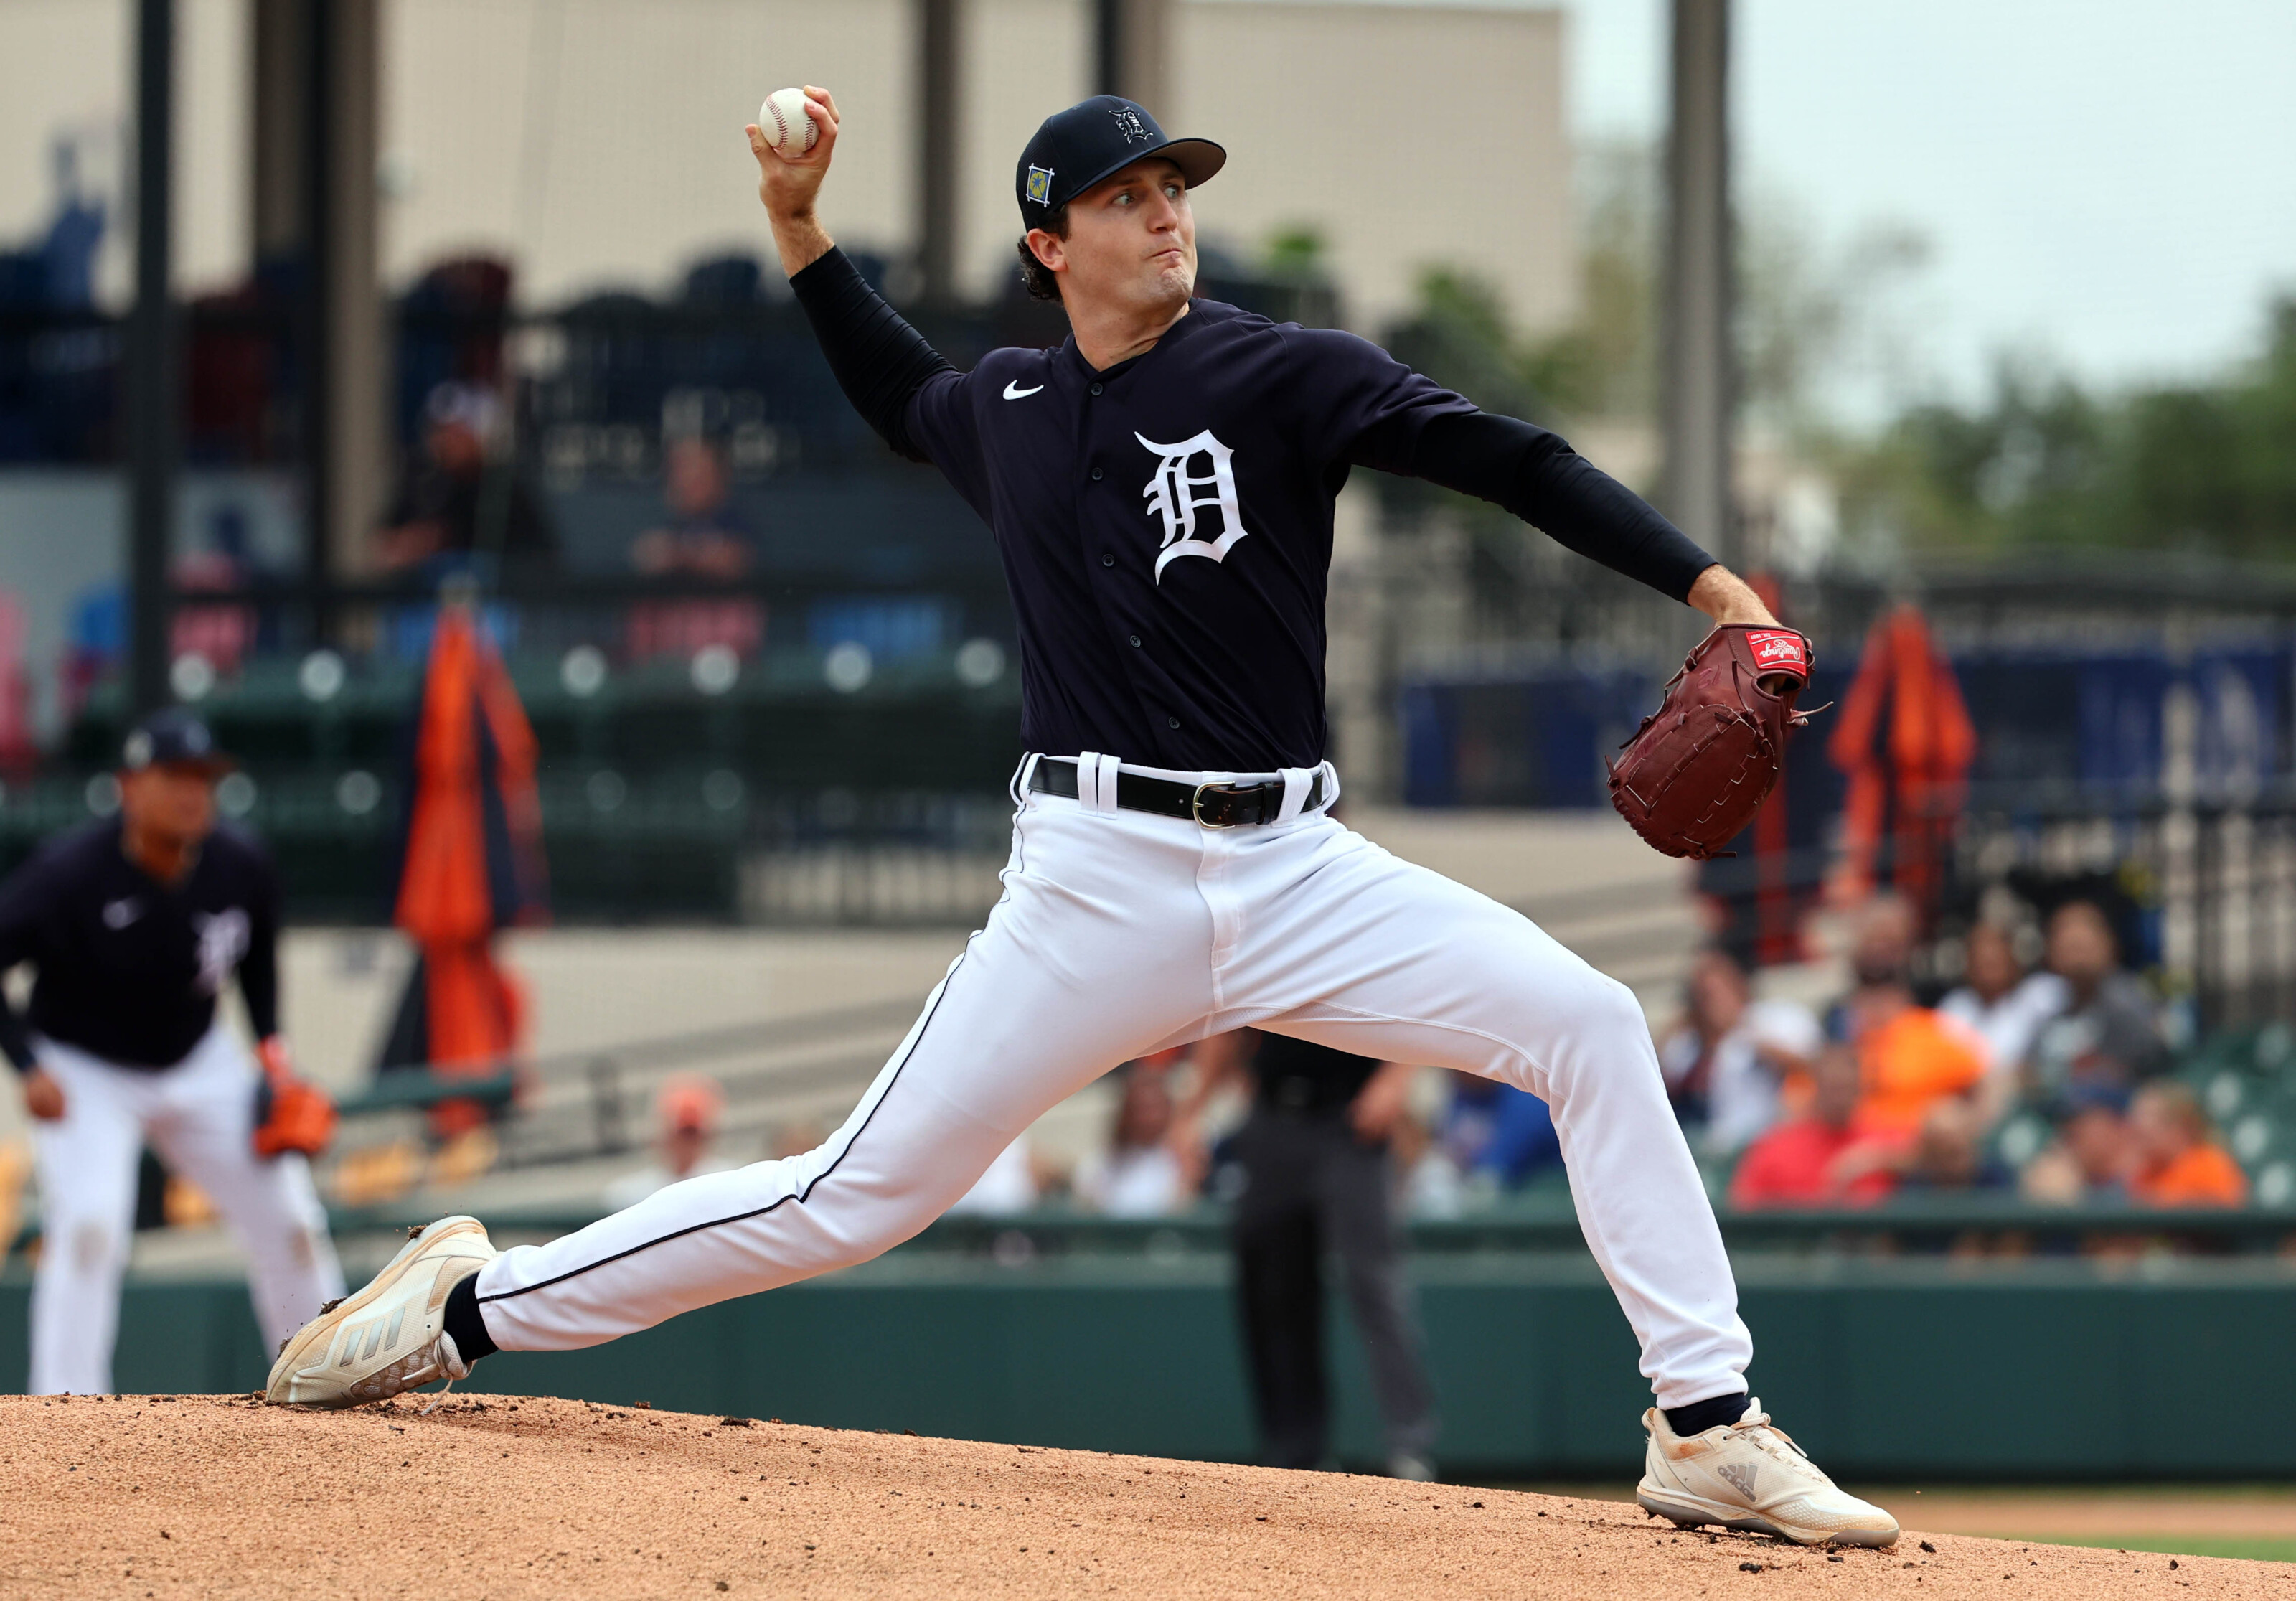 Springville's Casey Mize invited to Detroit Tigers' spring training; MLB  No. 4 overall pitching prospect expected to be called up this season - The  Trussville Tribune